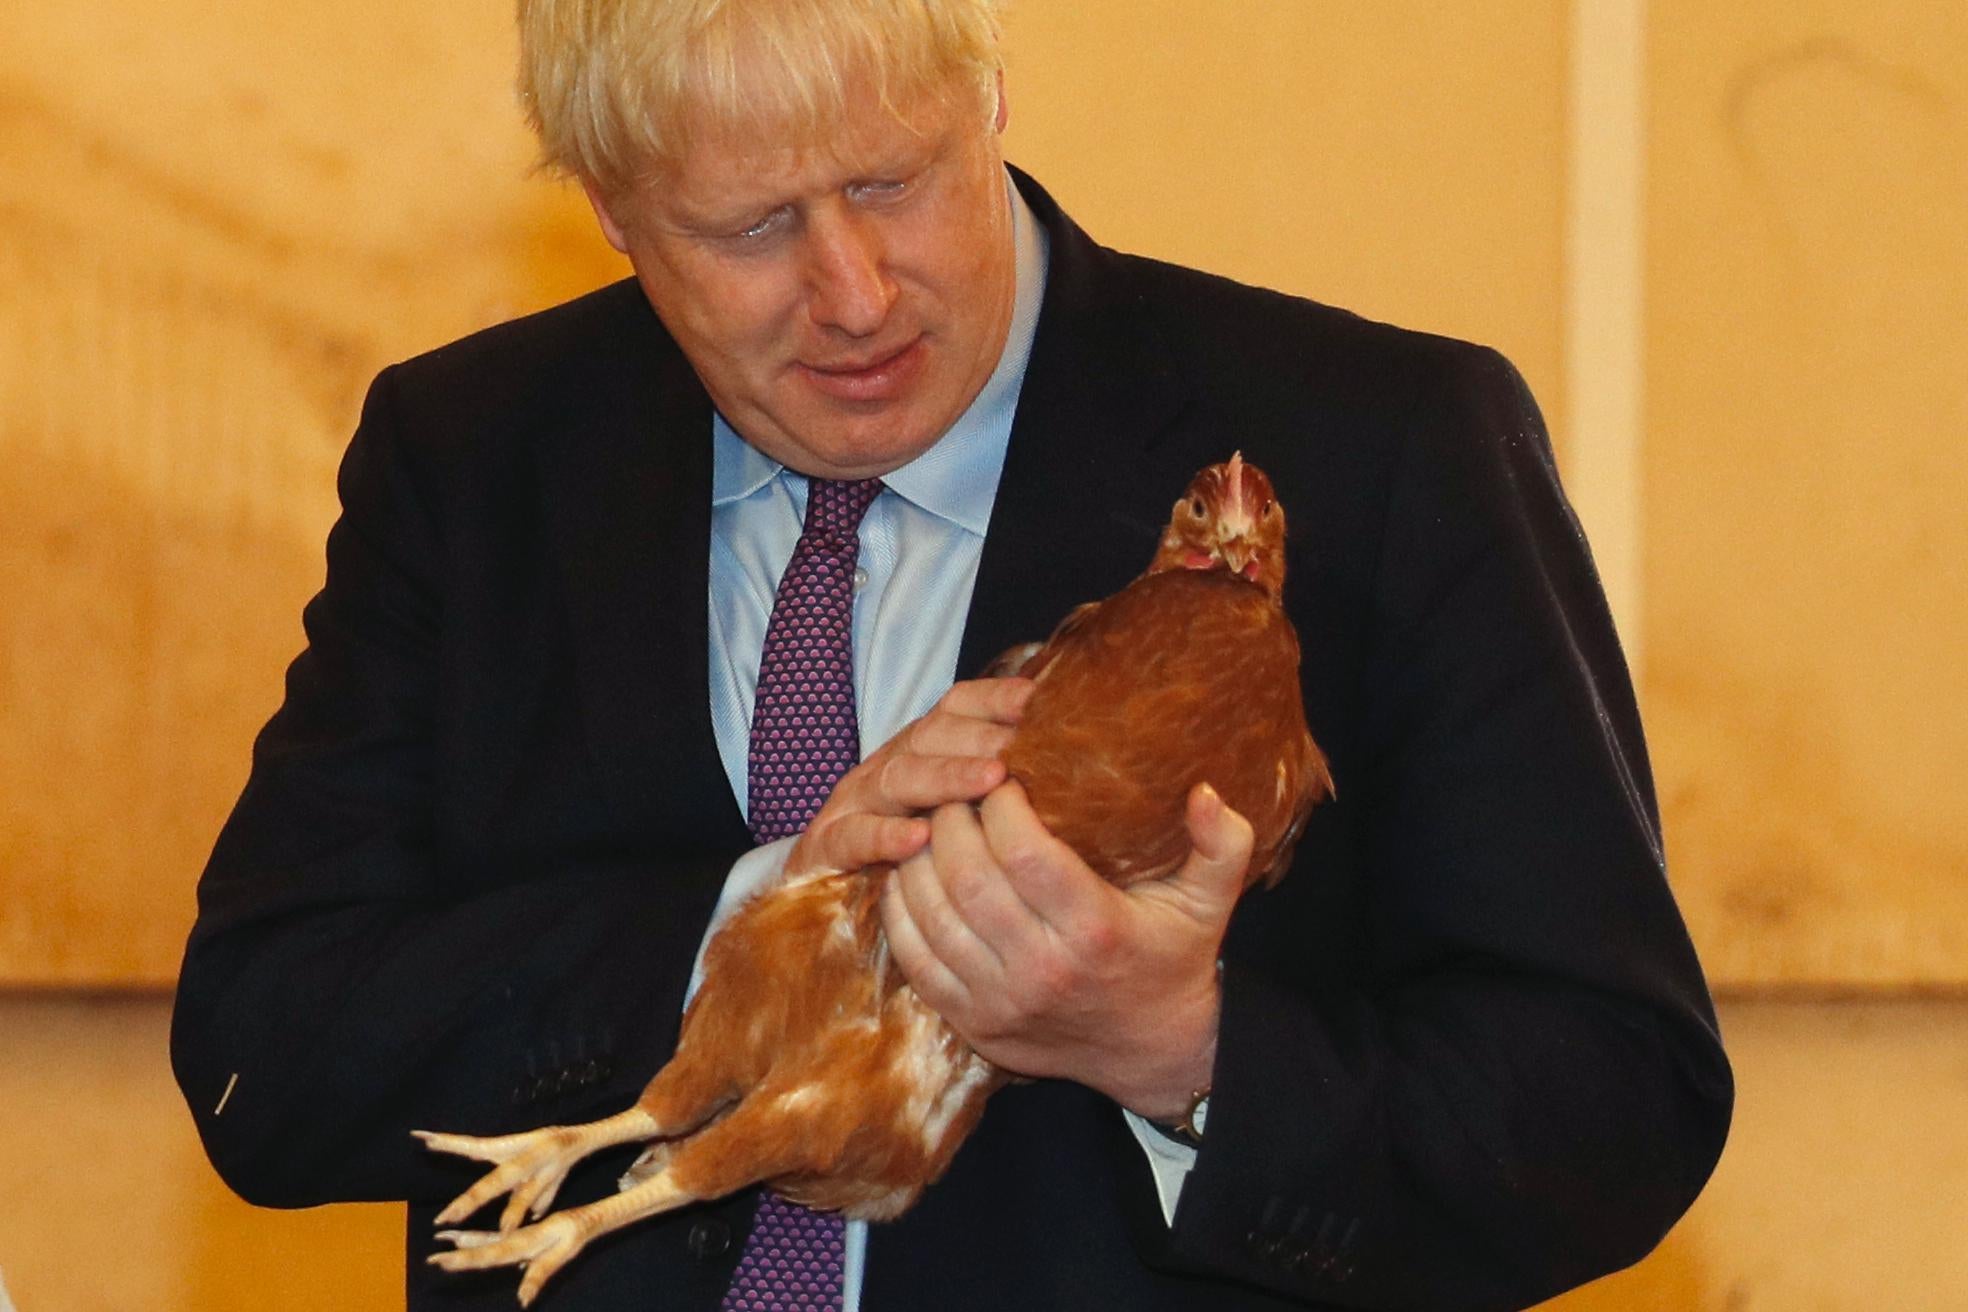 Boris Johnson holds a chicken and looks at it, appearing befuddled.